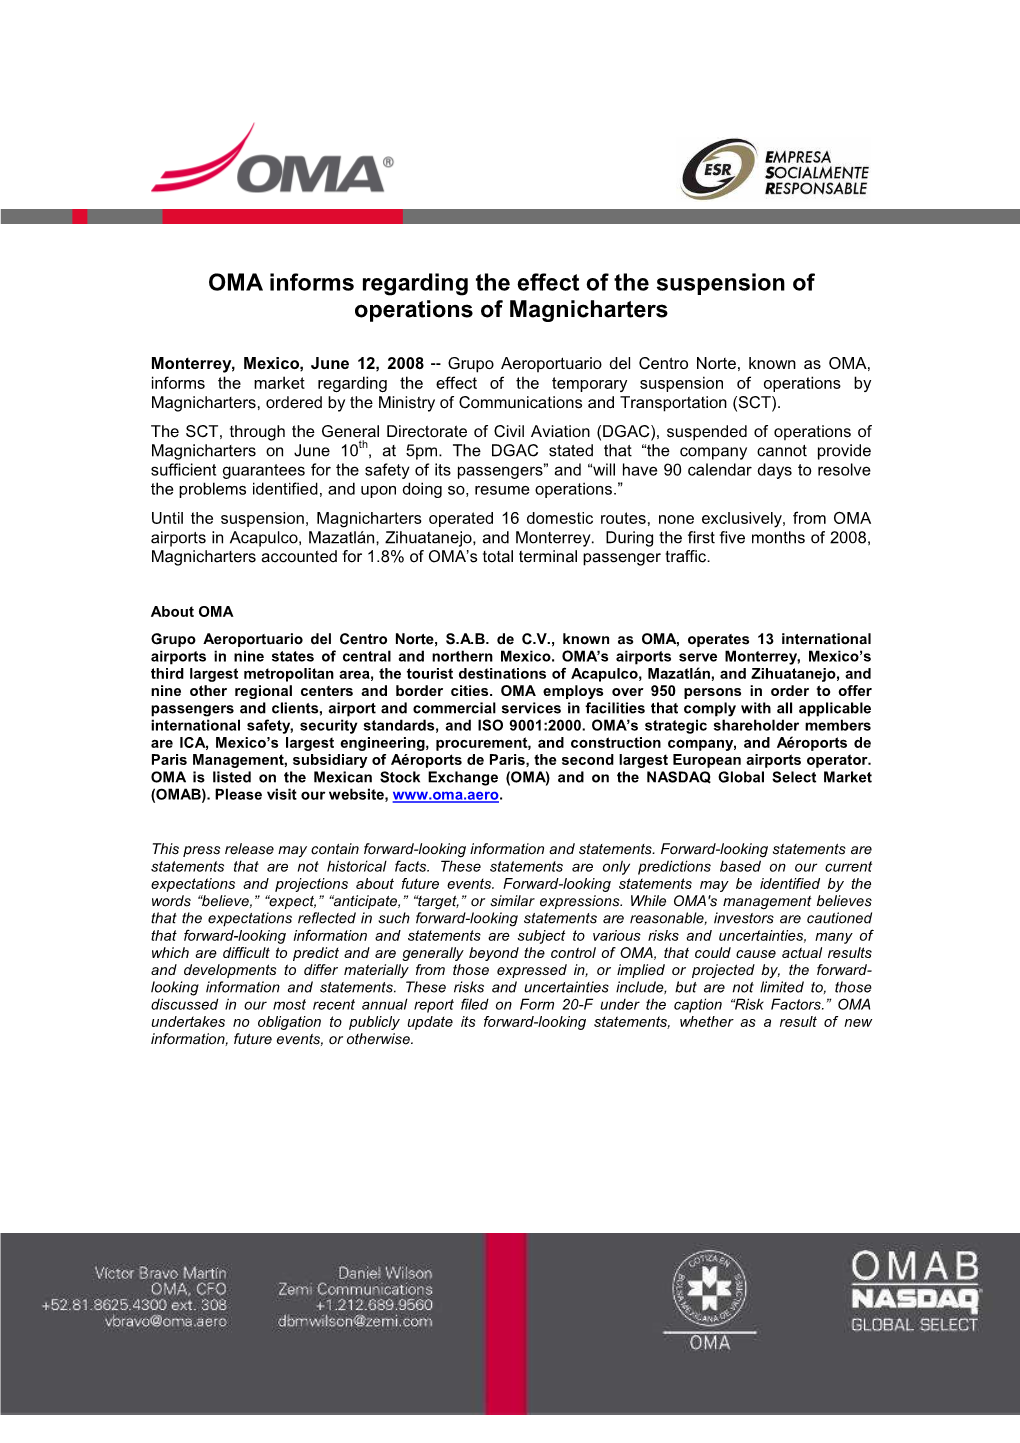 OMA Informs Regarding the Effect of the Suspension of Operations of Magnicharters